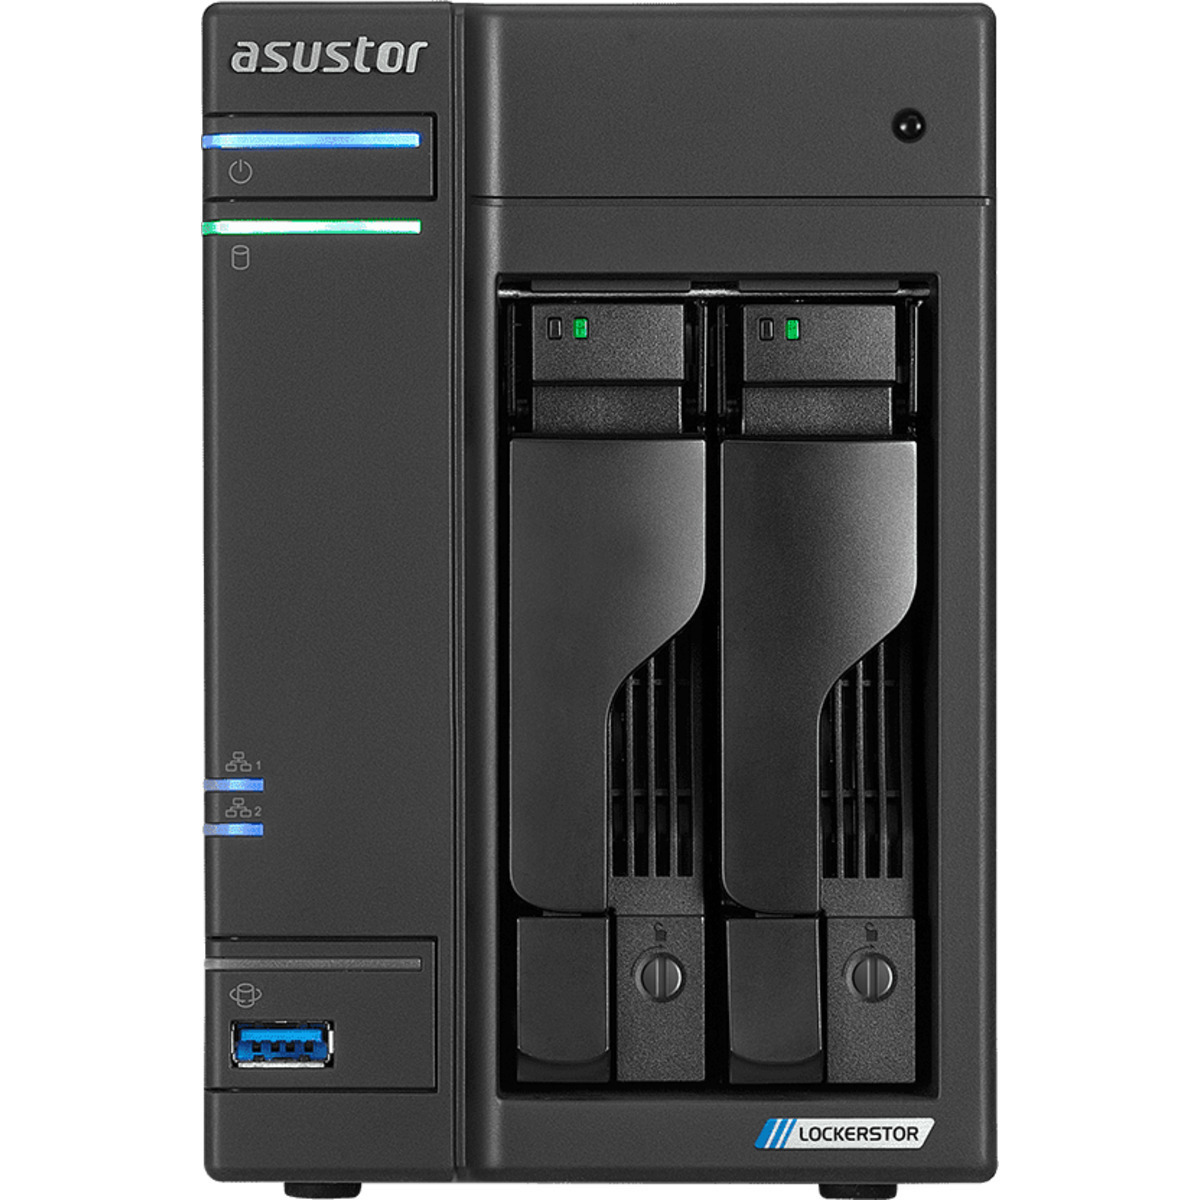 buy $1161 ASUSTOR AS6602T Lockerstor 2 20tb Desktop NAS - Network Attached Storage Device 2x10000gb Western Digital Gold WD102KRYZ 3.5 7200rpm SATA 6Gb/s HDD ENTERPRISE Class Drives Installed - Burn-In Tested - FREE RAM UPGRADE - nas headquarters buy network attached storage server device das new raid-5 free shipping usa christmas new year holiday sale AS6602T Lockerstor 2